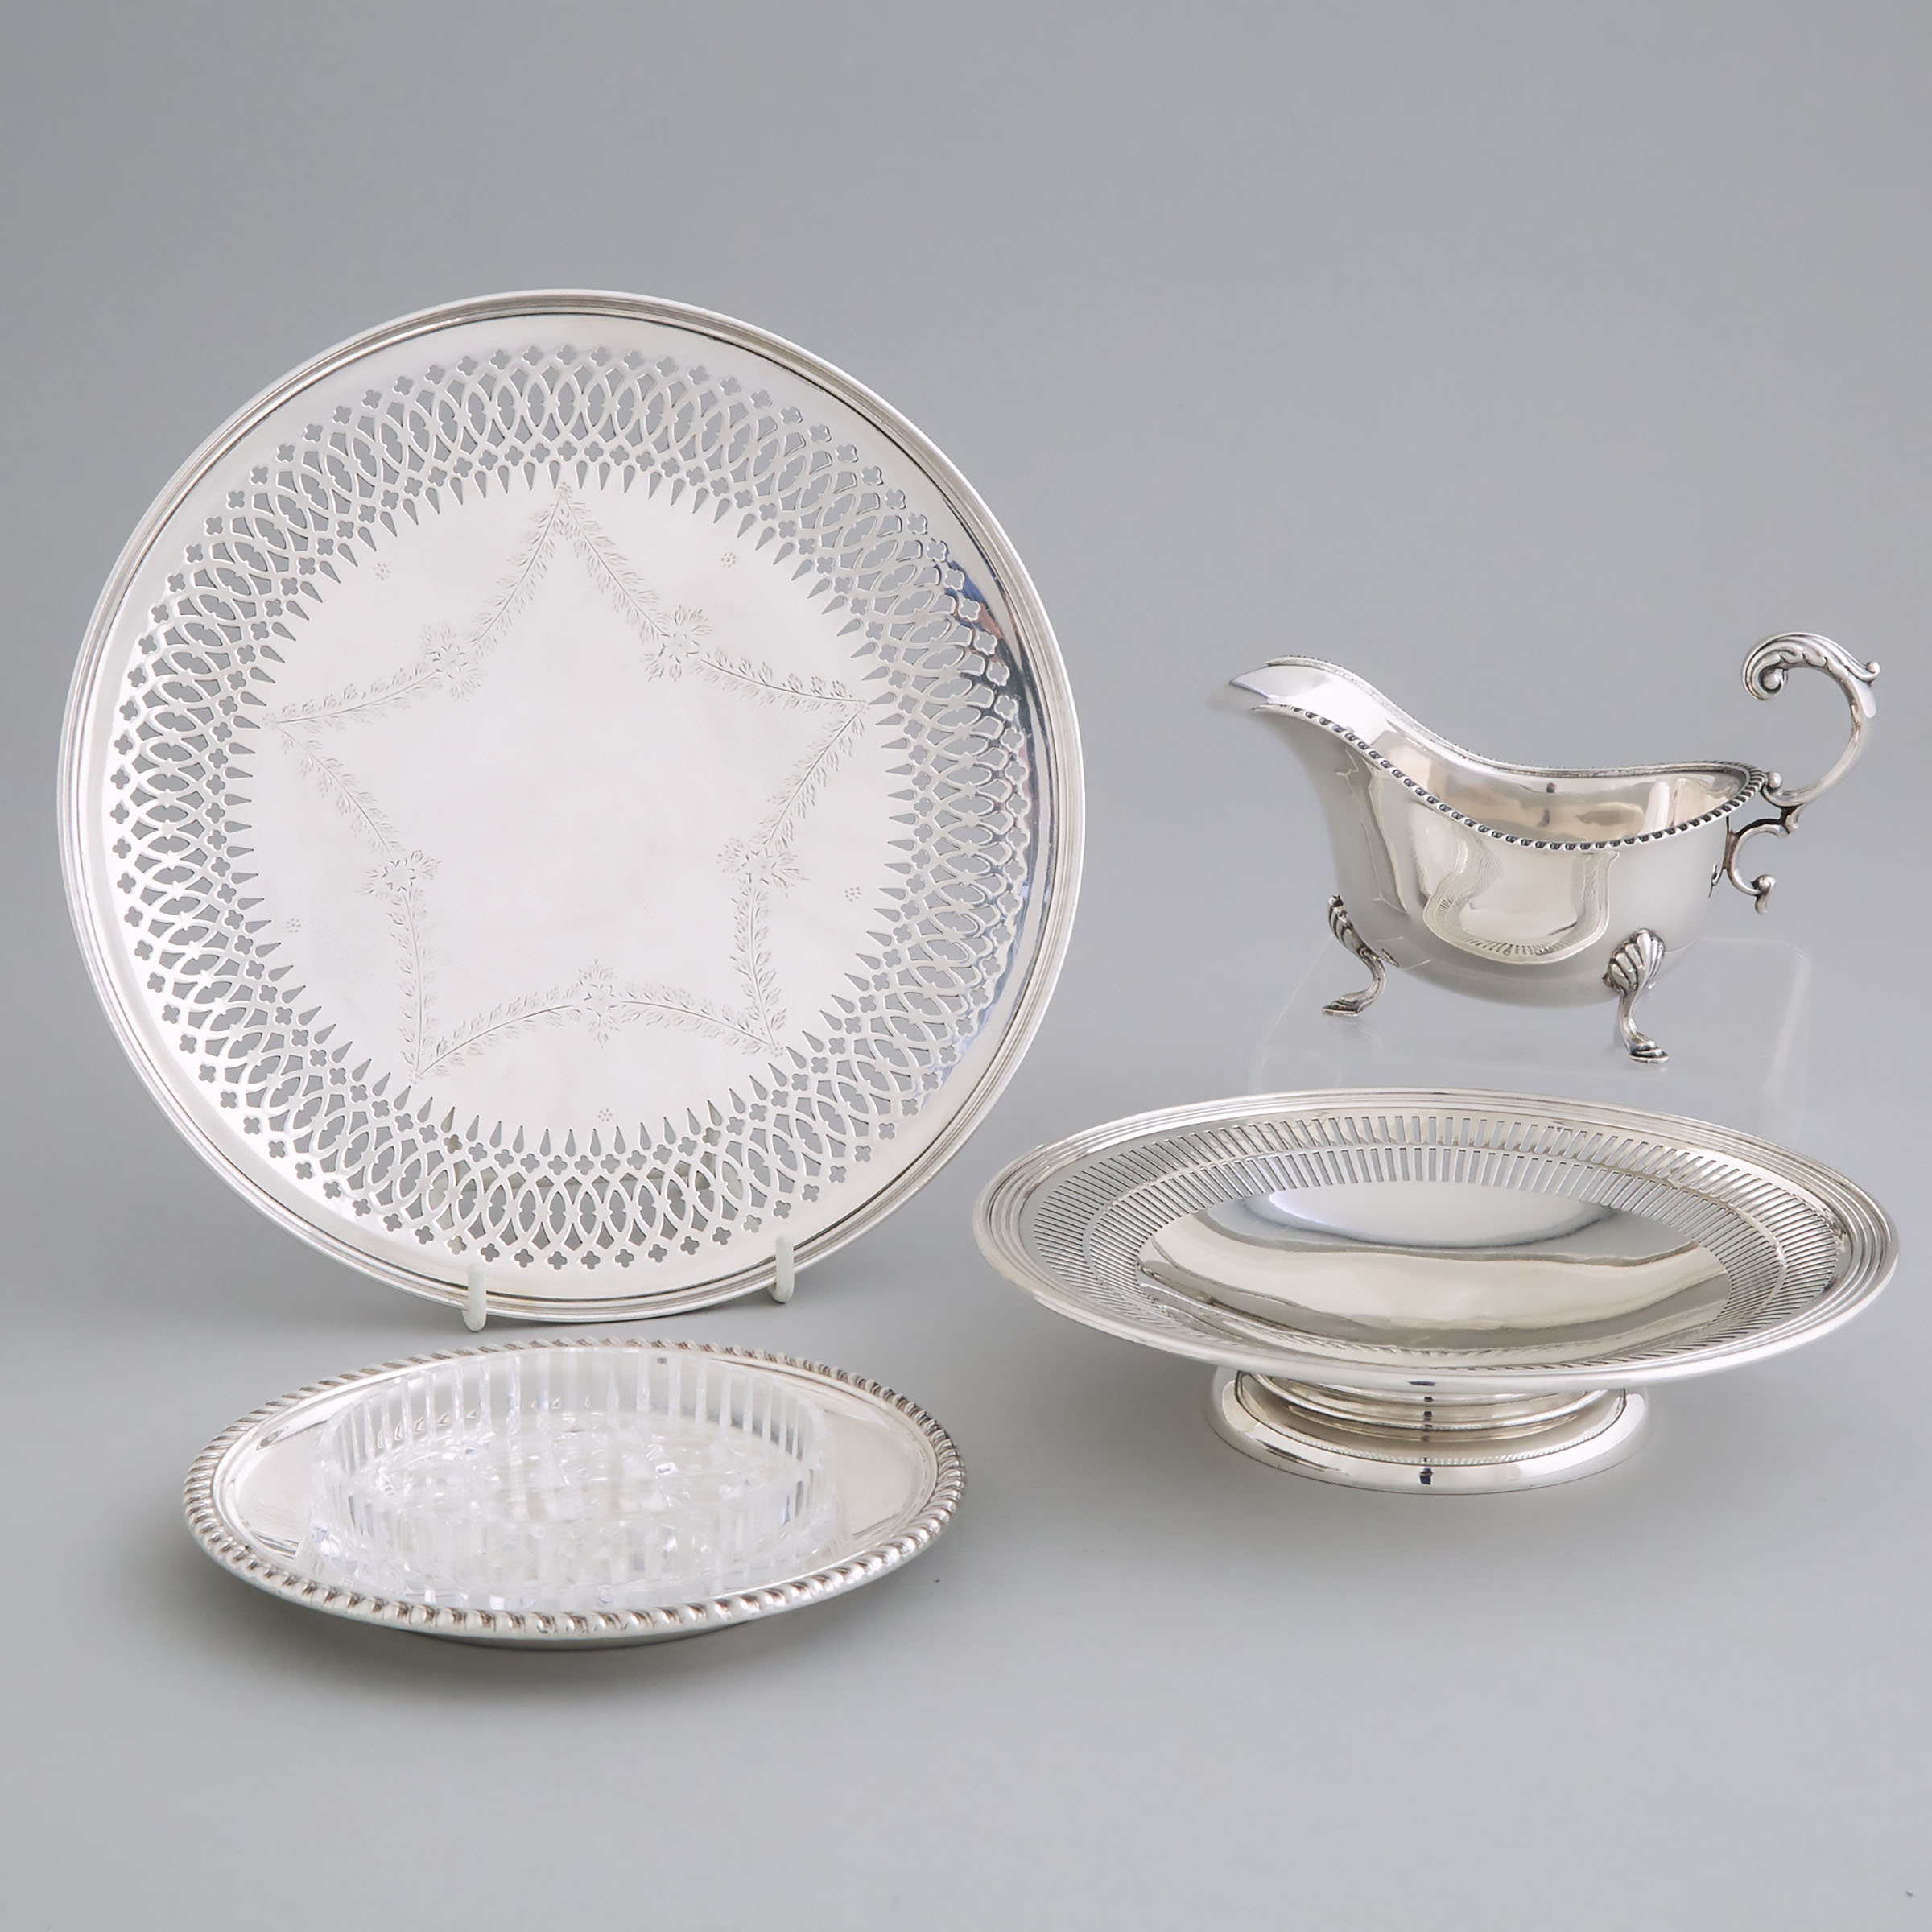 Group of Canadian Silver, Henry Birks & Sons, Montreal, Que., 20th century